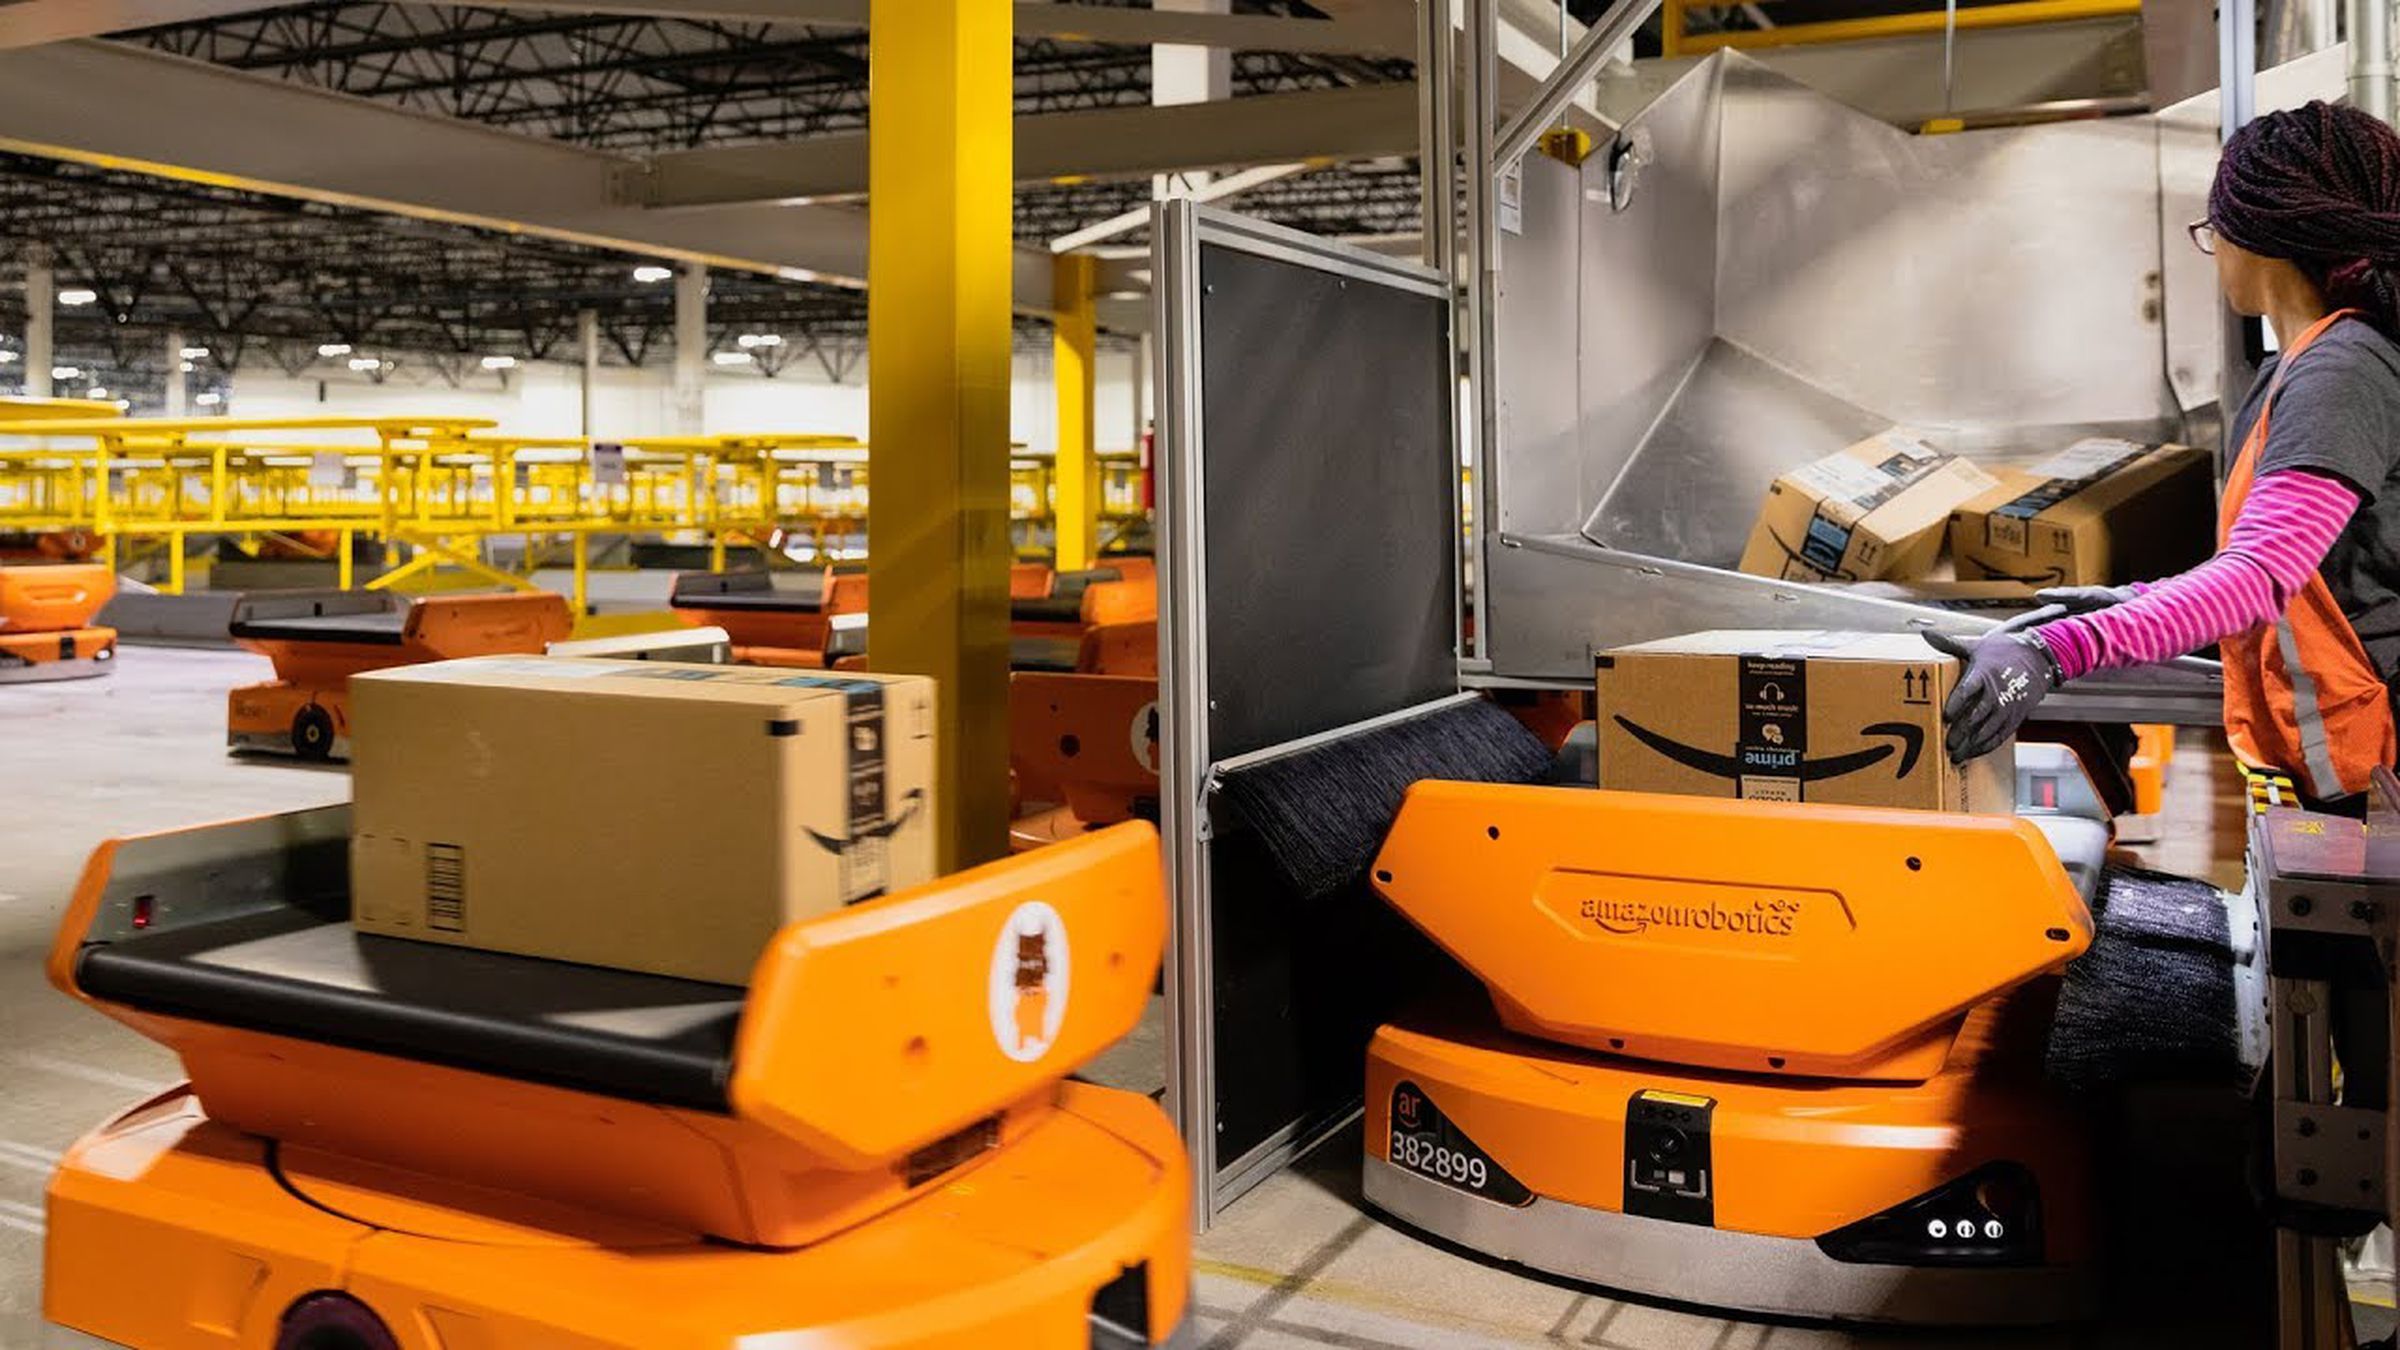 Amazon showed off two new warehouse robots at re:MARS: Pegasus and Xanthus. 